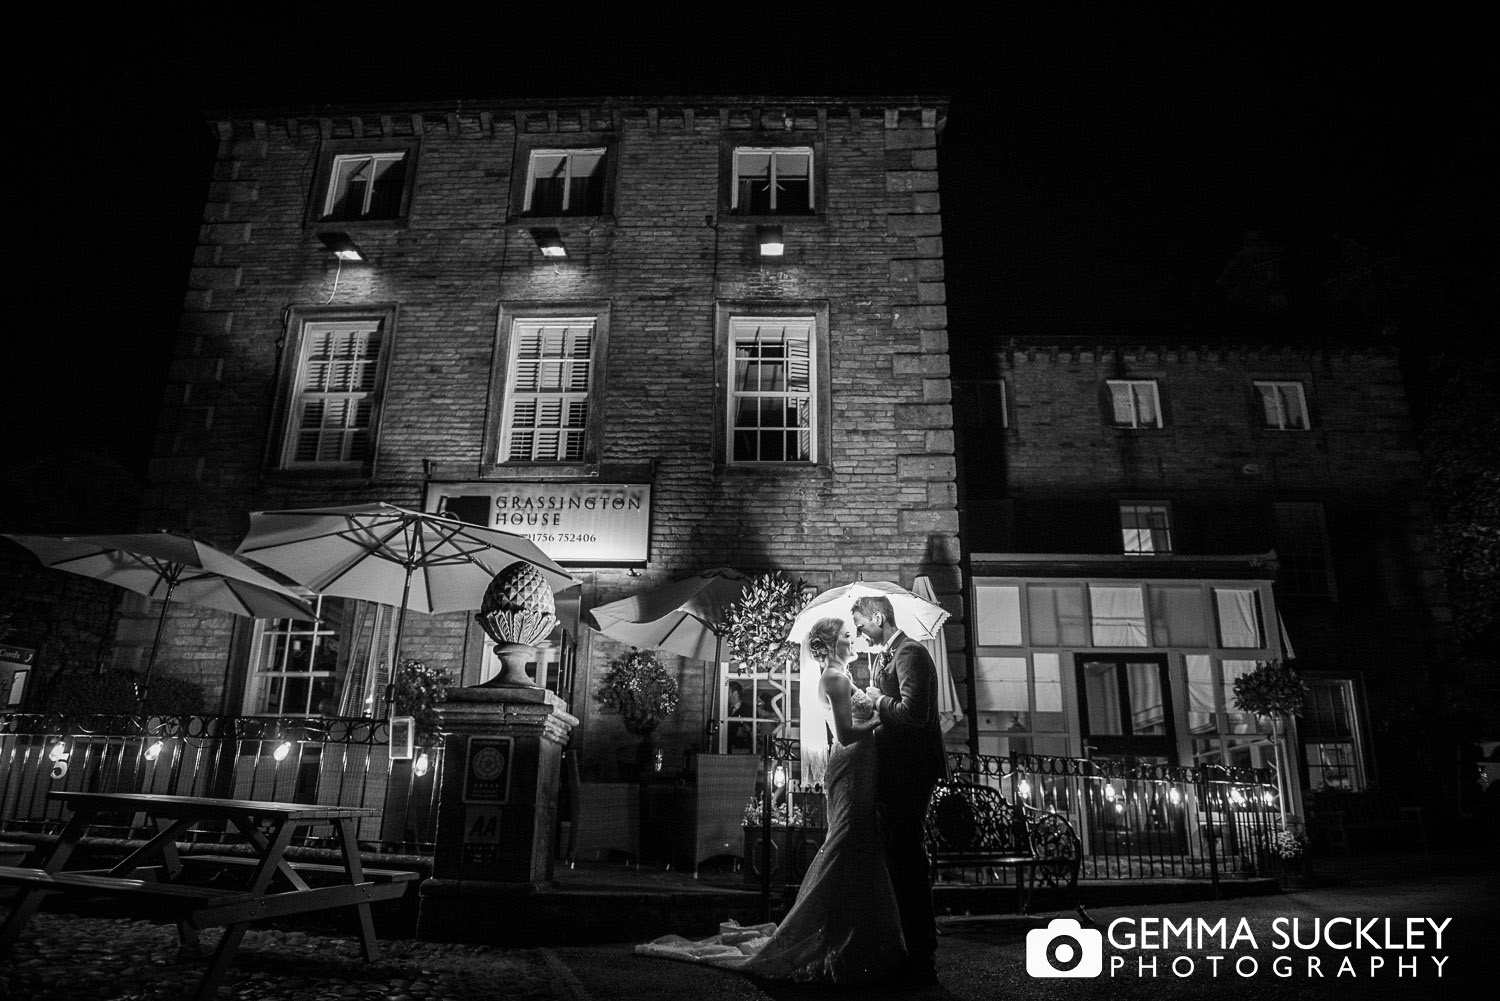 nigth wedding photo of bride and groom at Grassington House